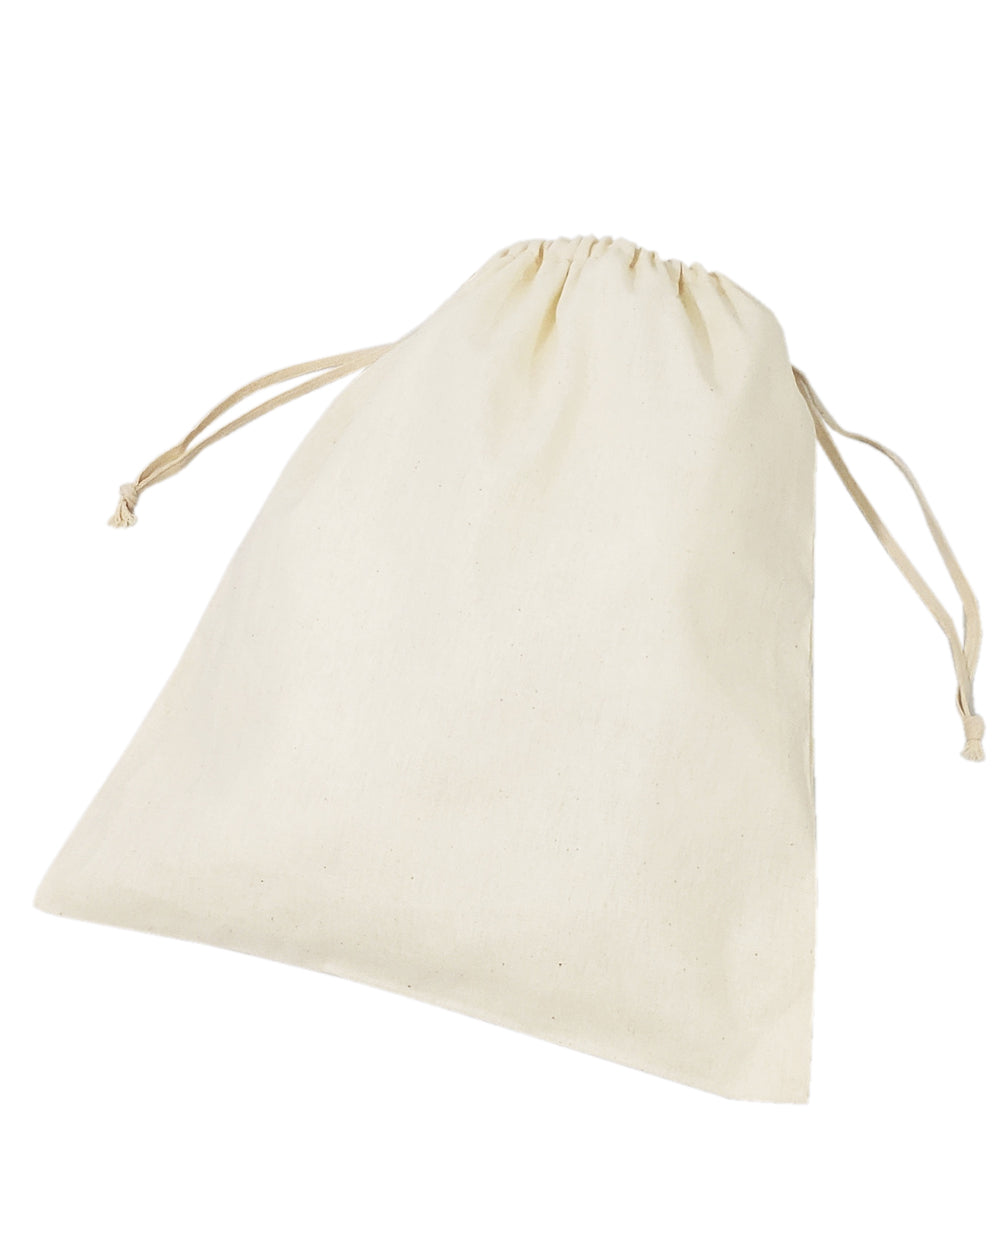 240 ct Bulk Cotton Shoe Bags / Affordable Drawstring Bags - By Case